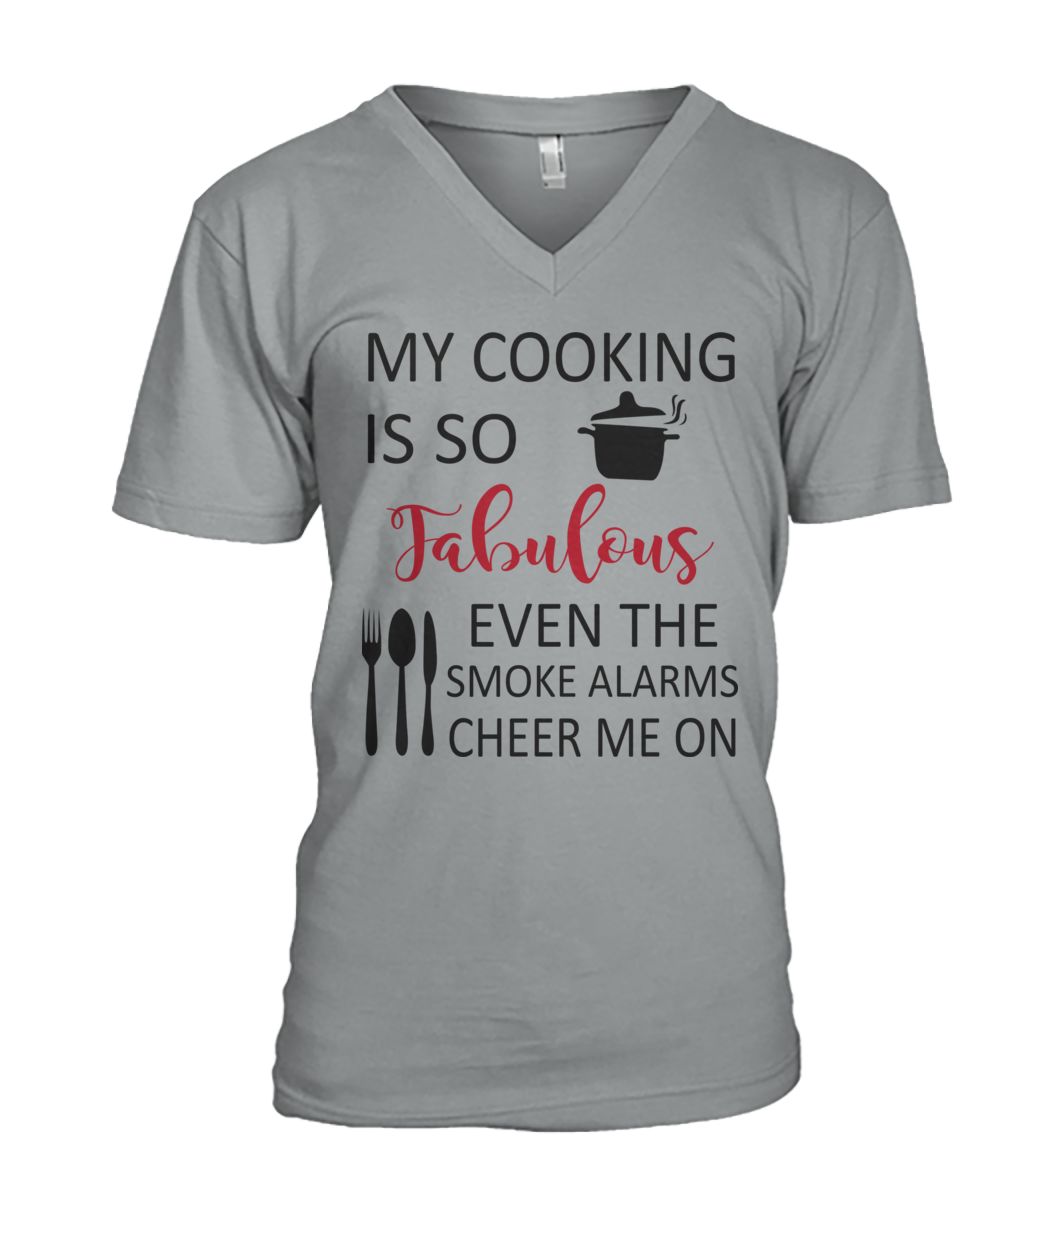 My cooking is so fabulous even the smoke alarms cheer me on mens v-neck